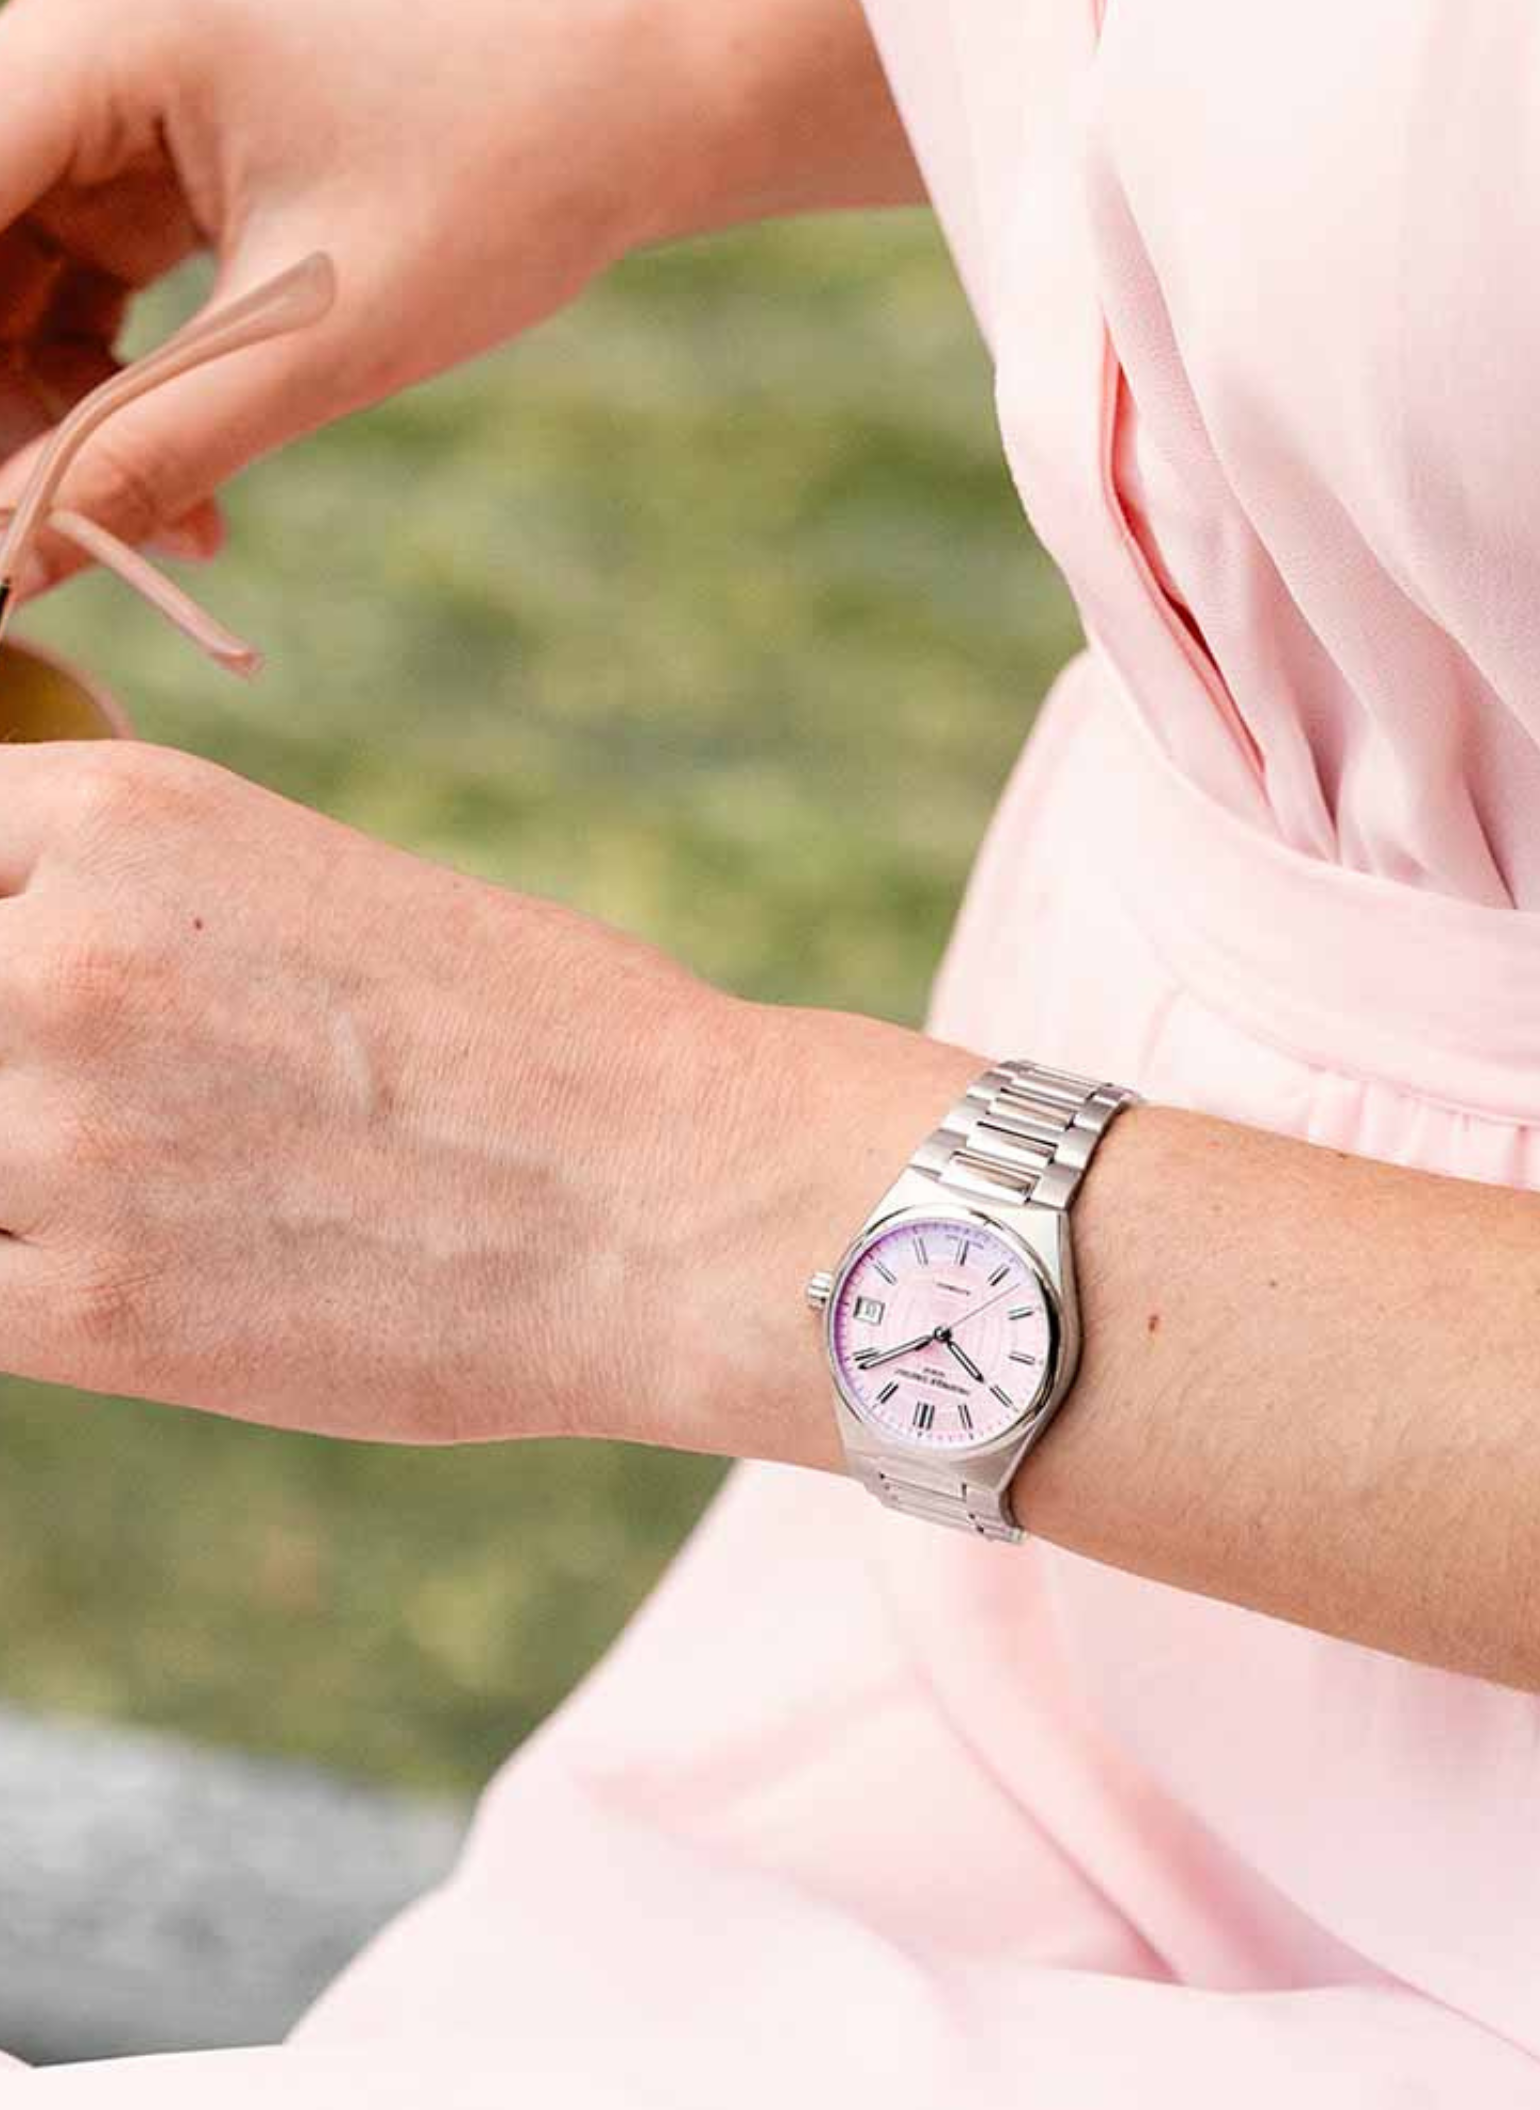 Frederique Constant Highlife Pink